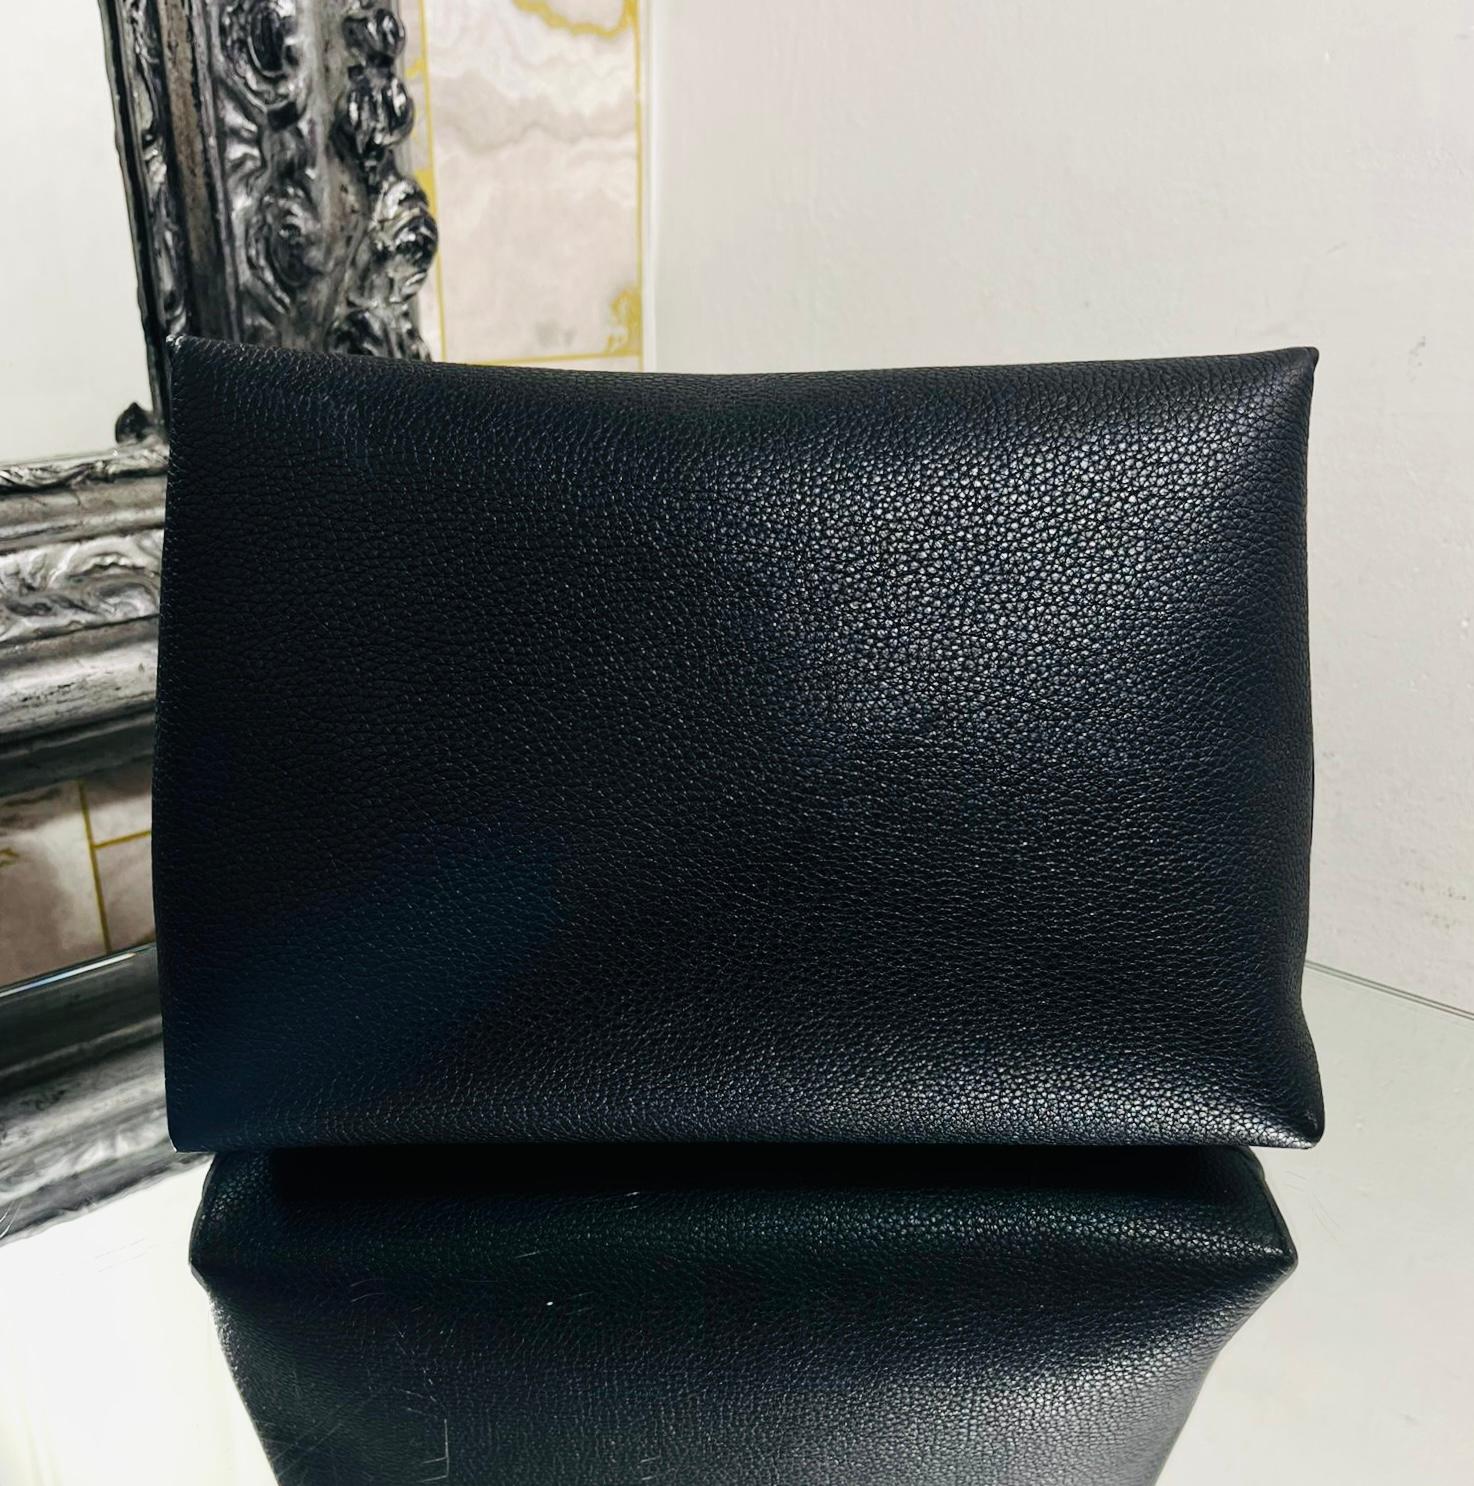 Black Mulberry Darley Leather Cosmetic Pouch